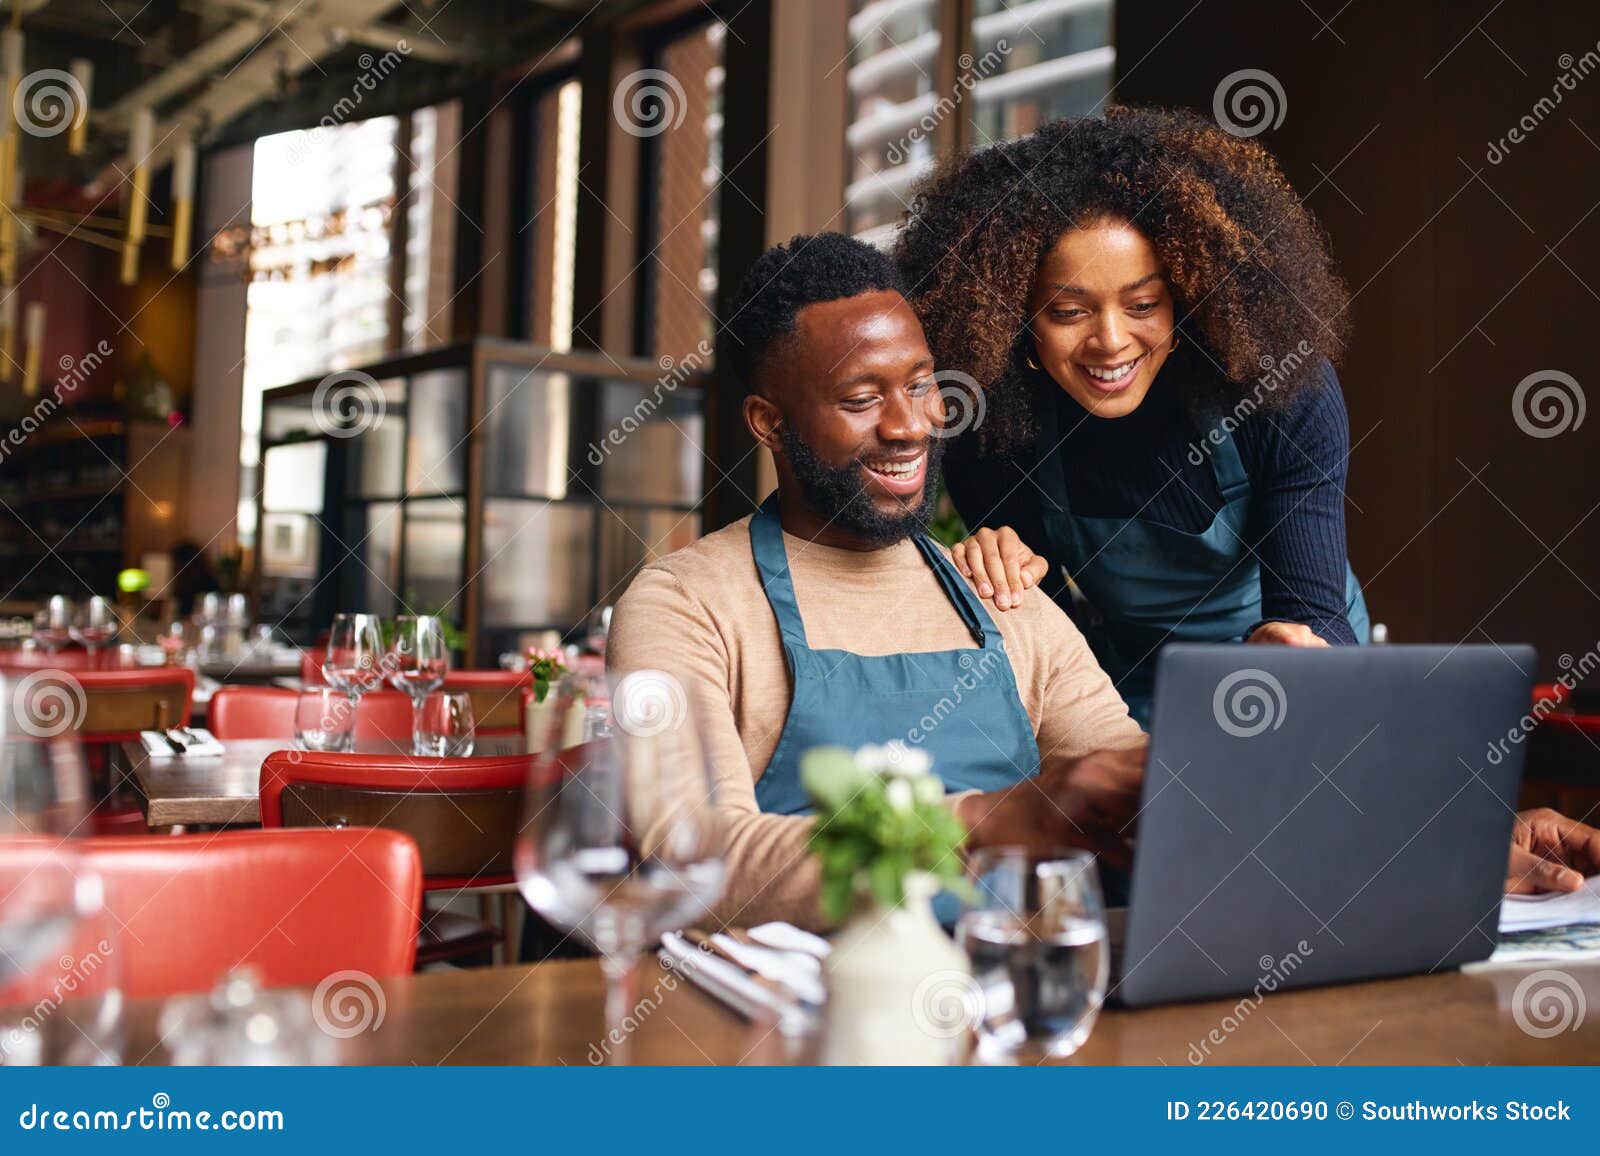 small business owners using laptop in restaurant